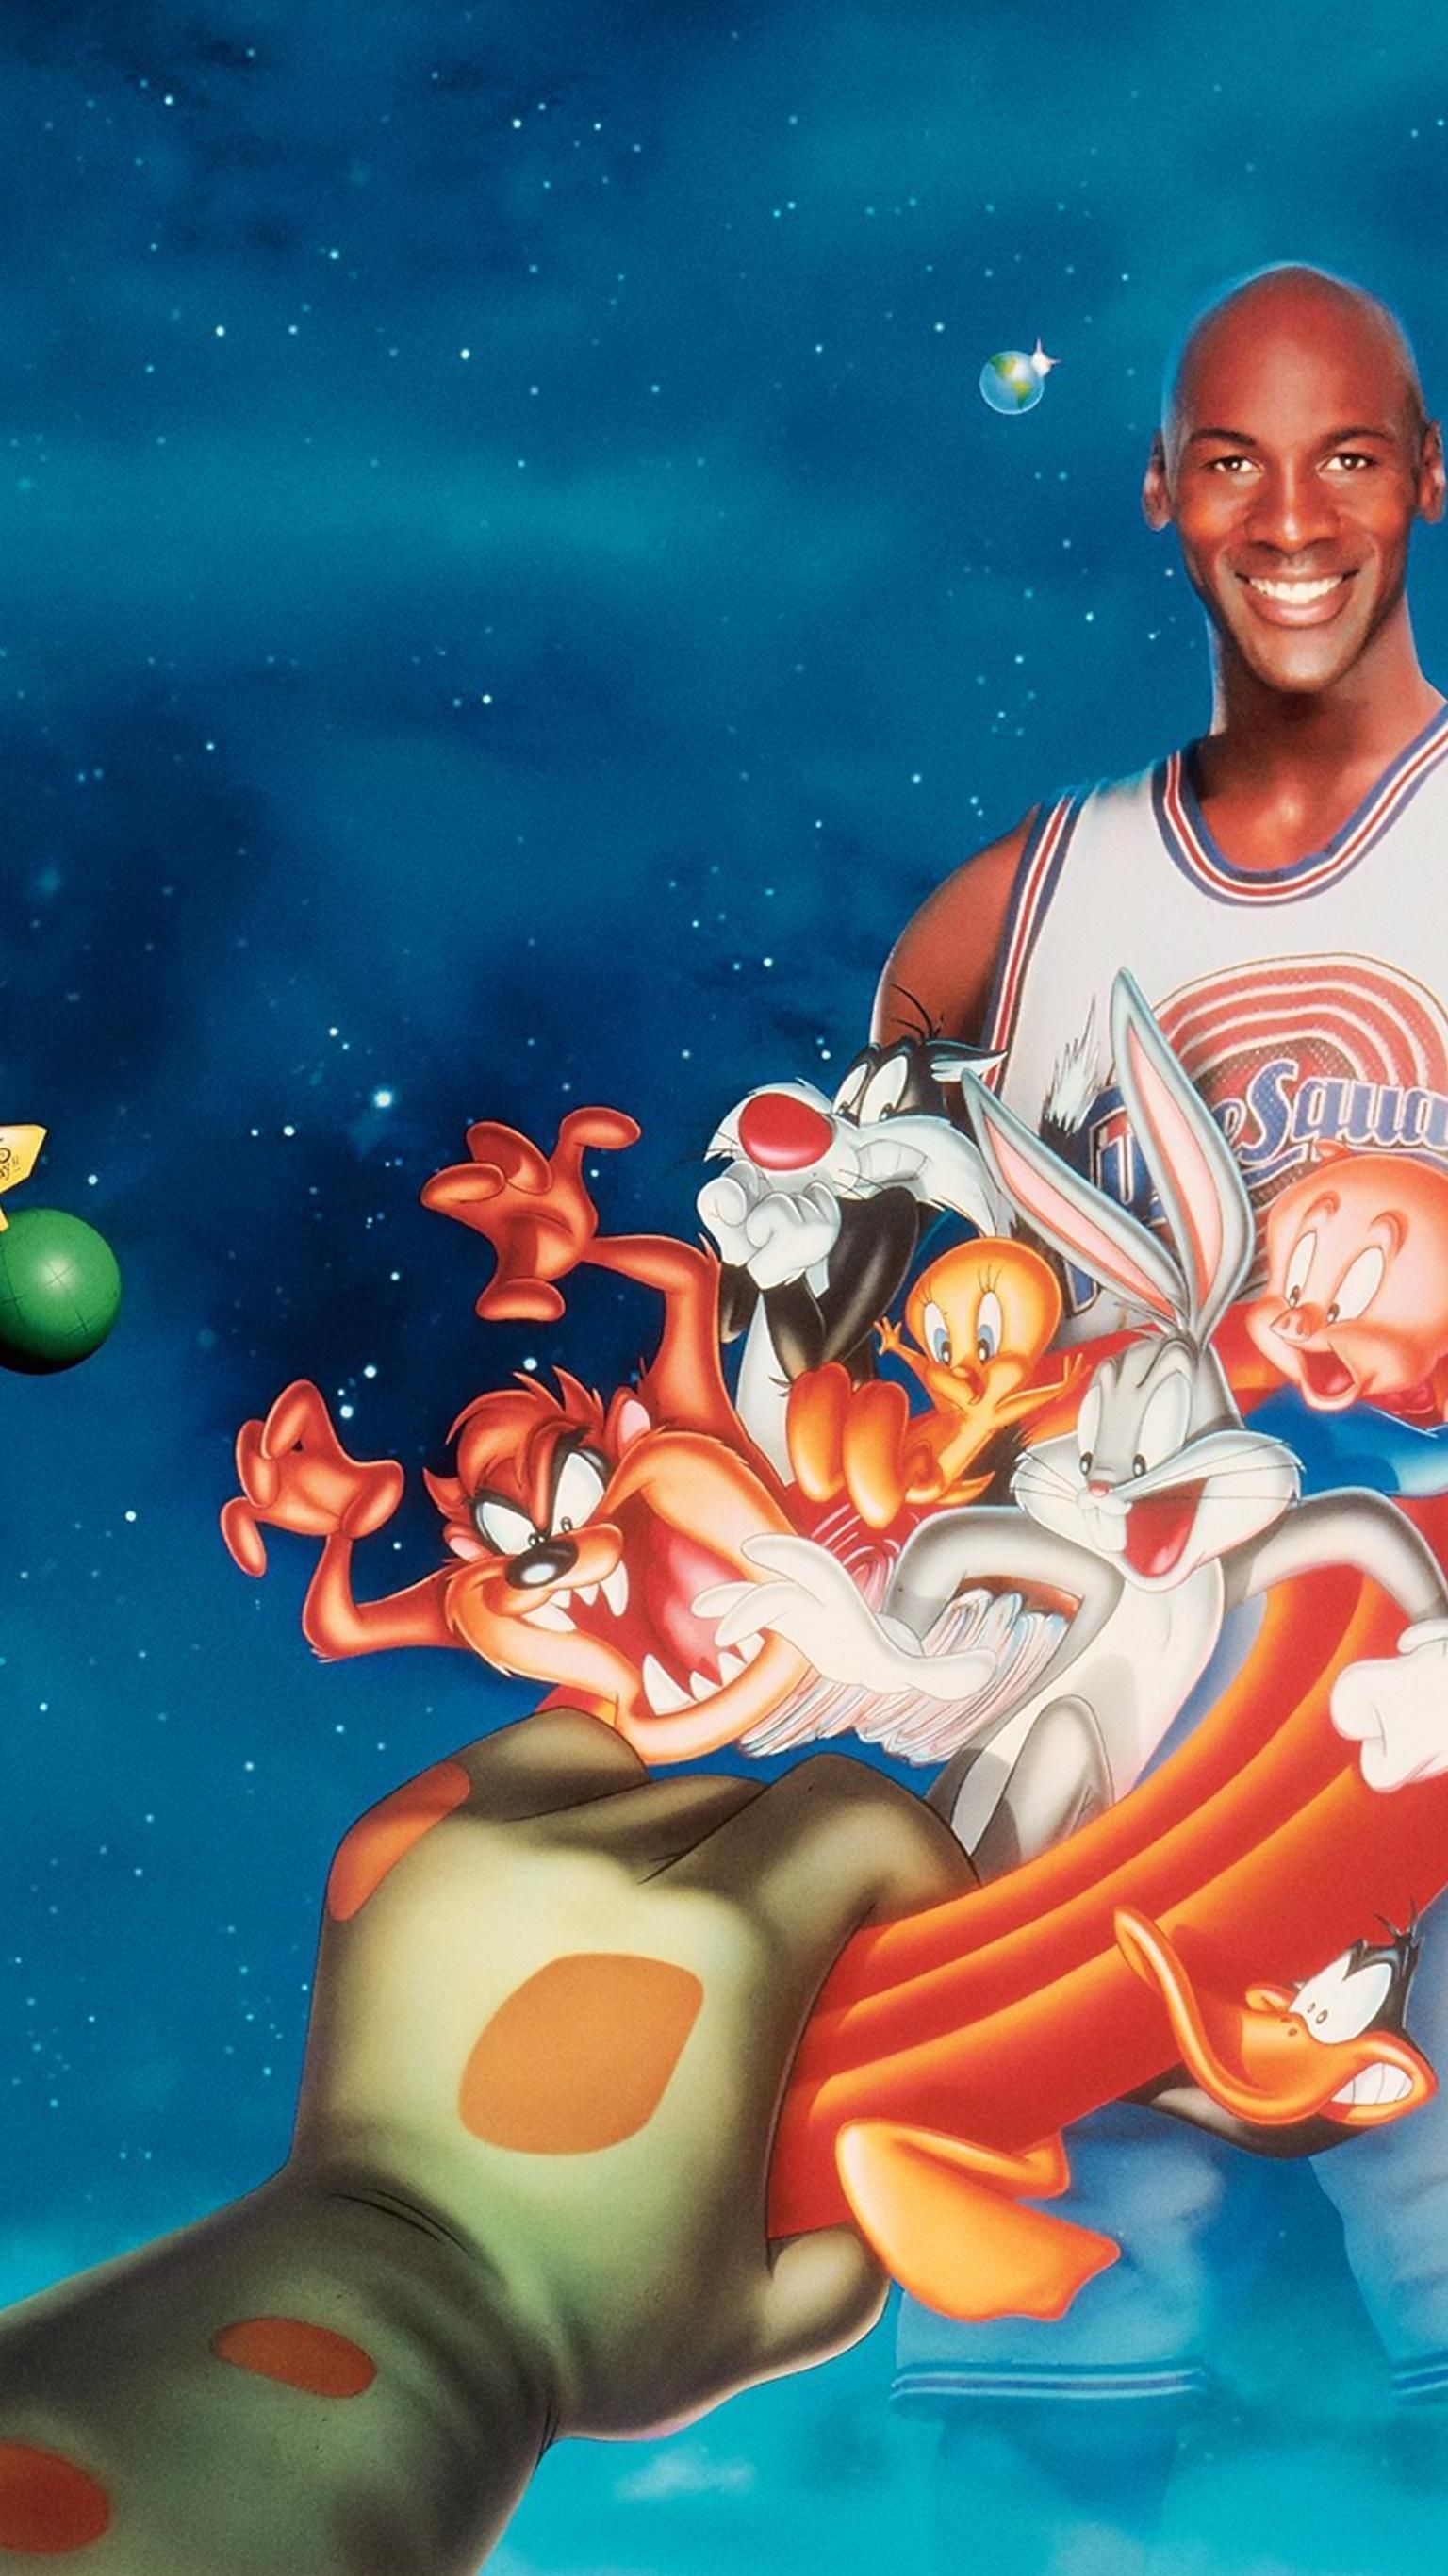 Space Jam Bugs Bunny Wallpapers : Bugs bunny, space jam from famous